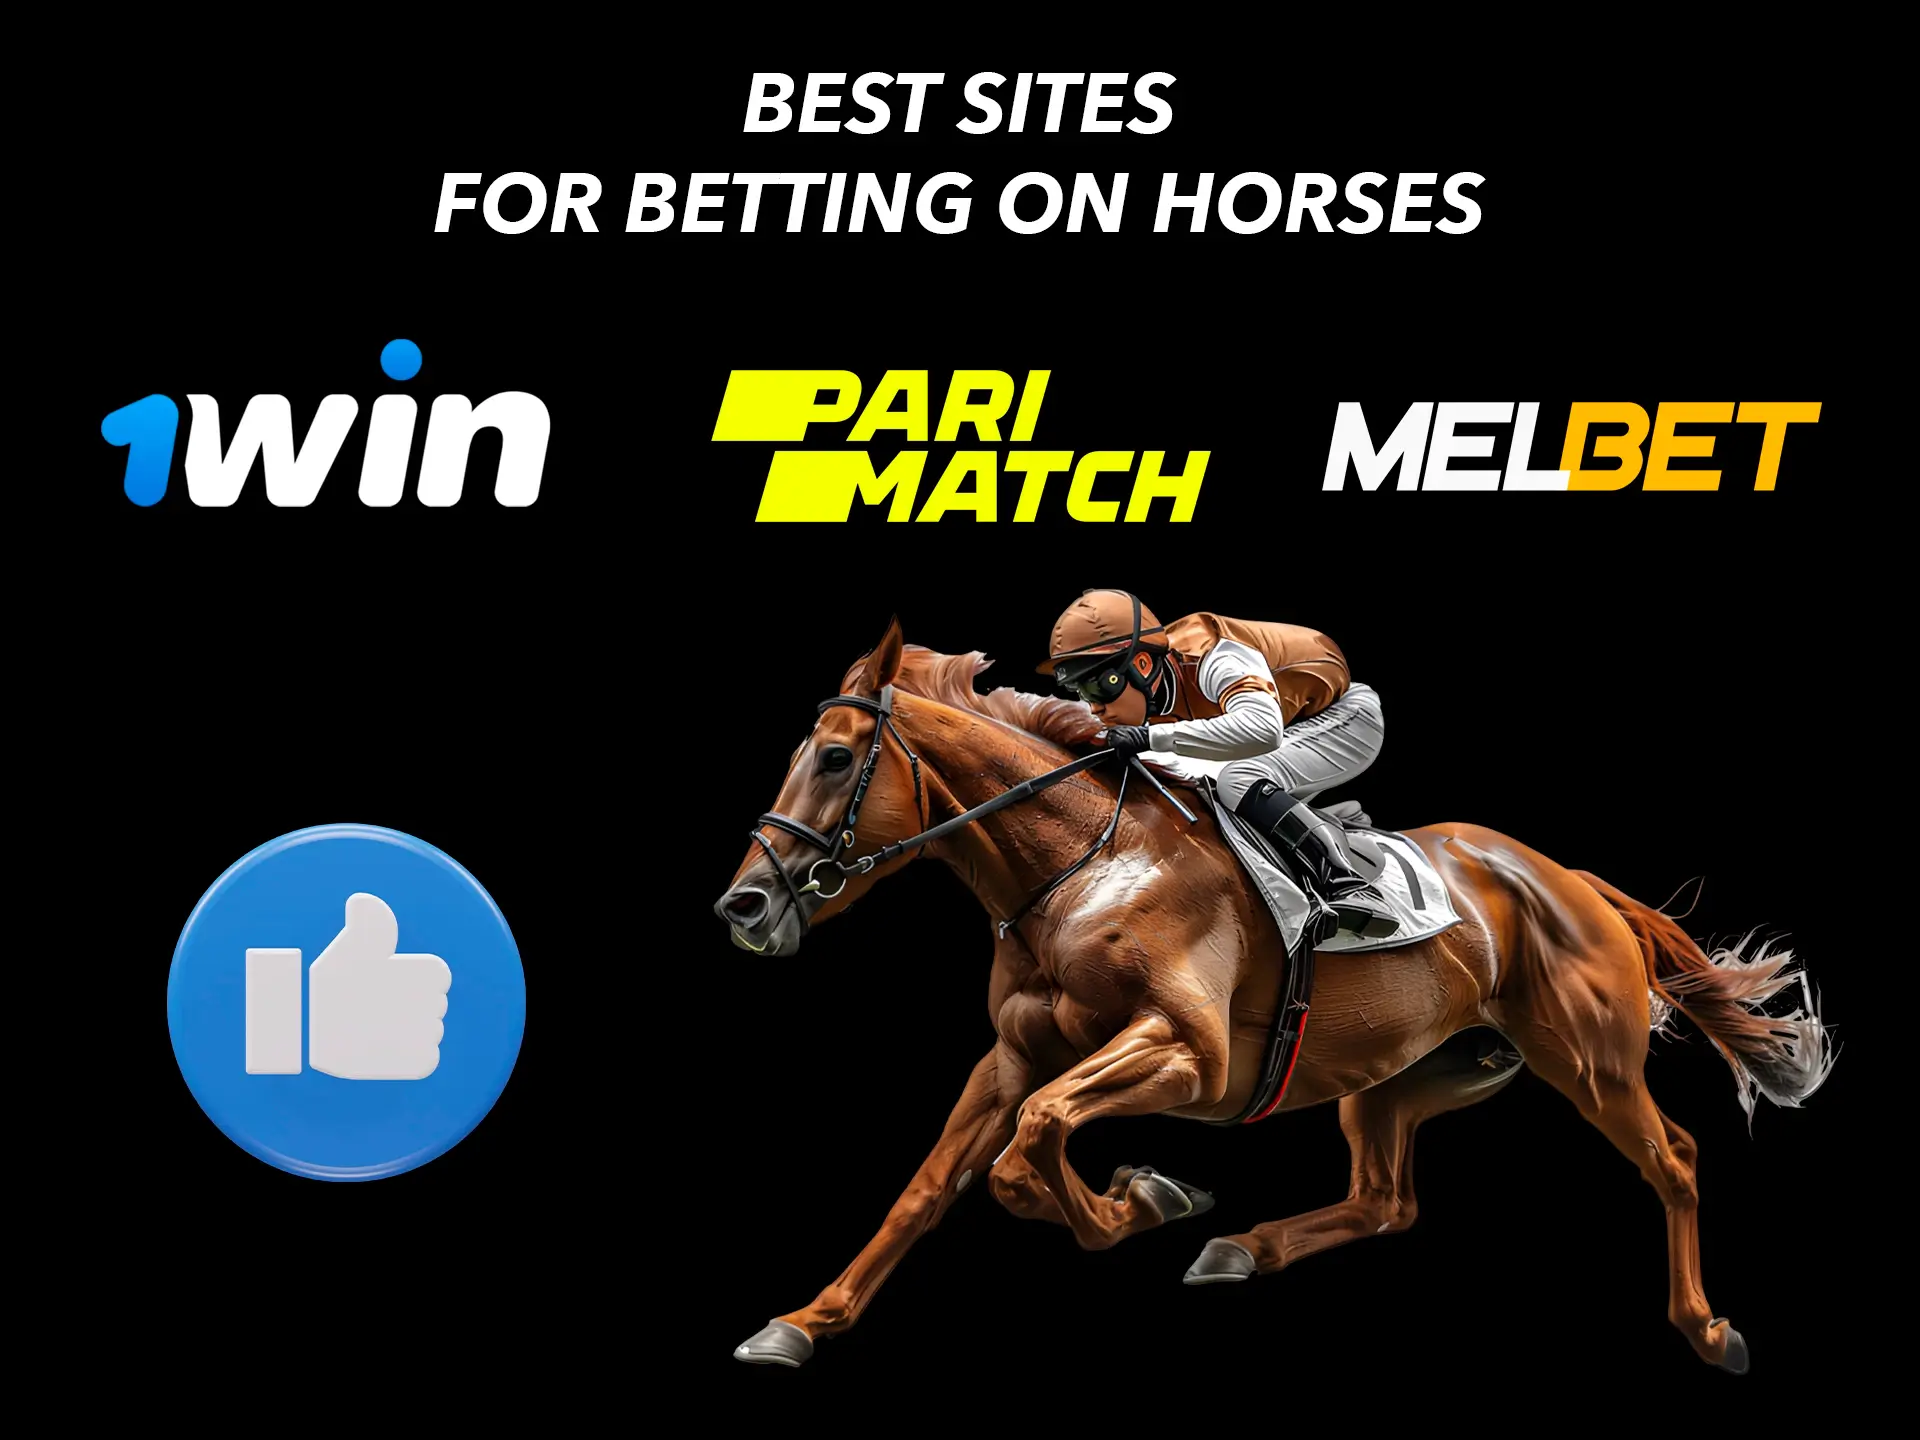 1Win, Parimatch and Melbet are the best sites with big bonuses for betting on horse racing.